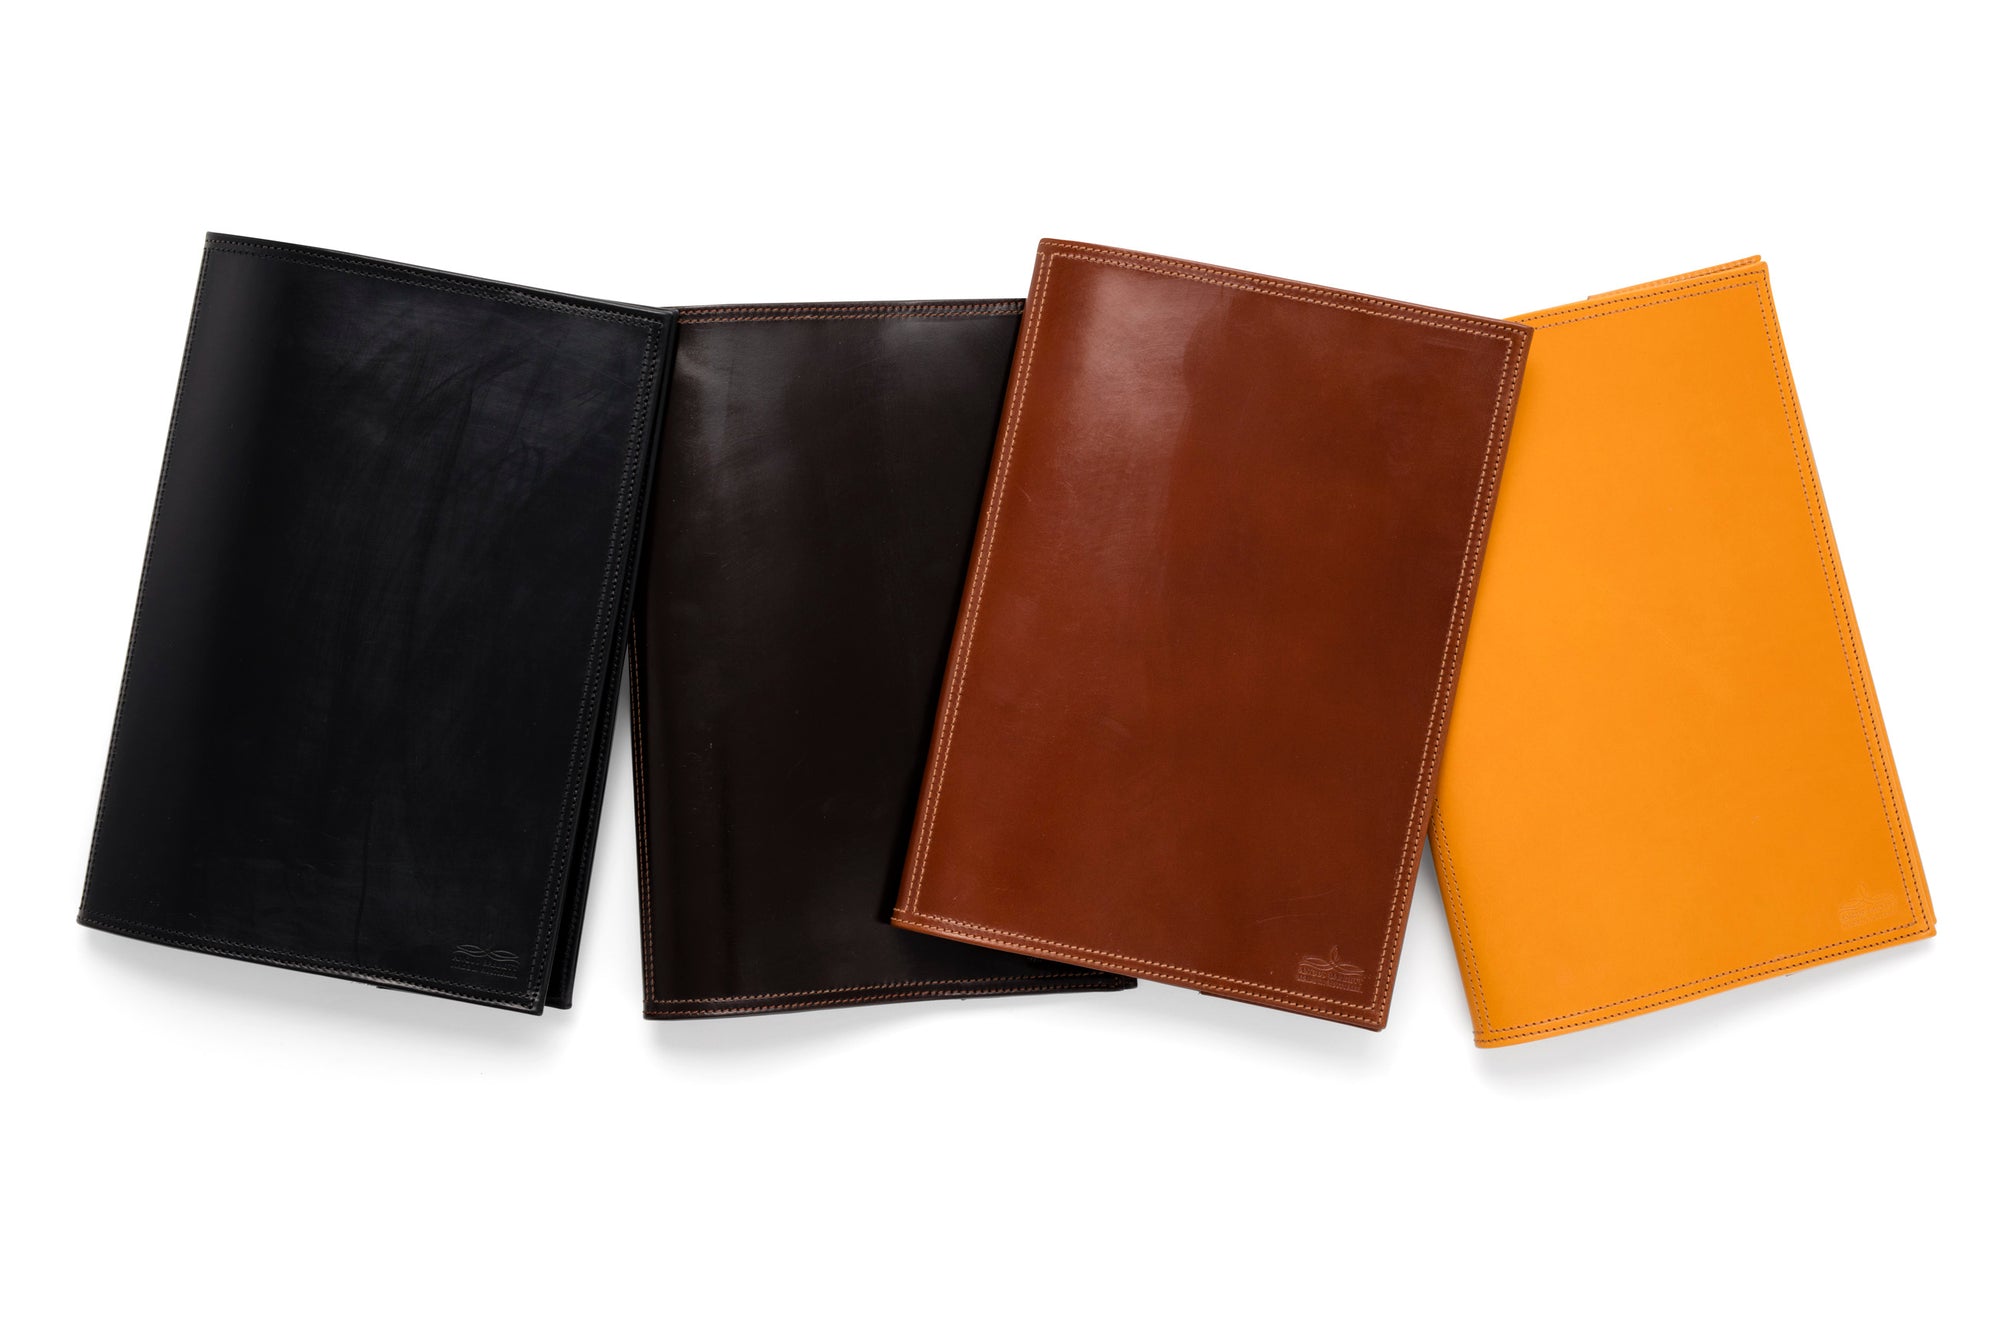 Angus Barrett A4 Diary Cover in Black, Dark Brown, Tan and Gold